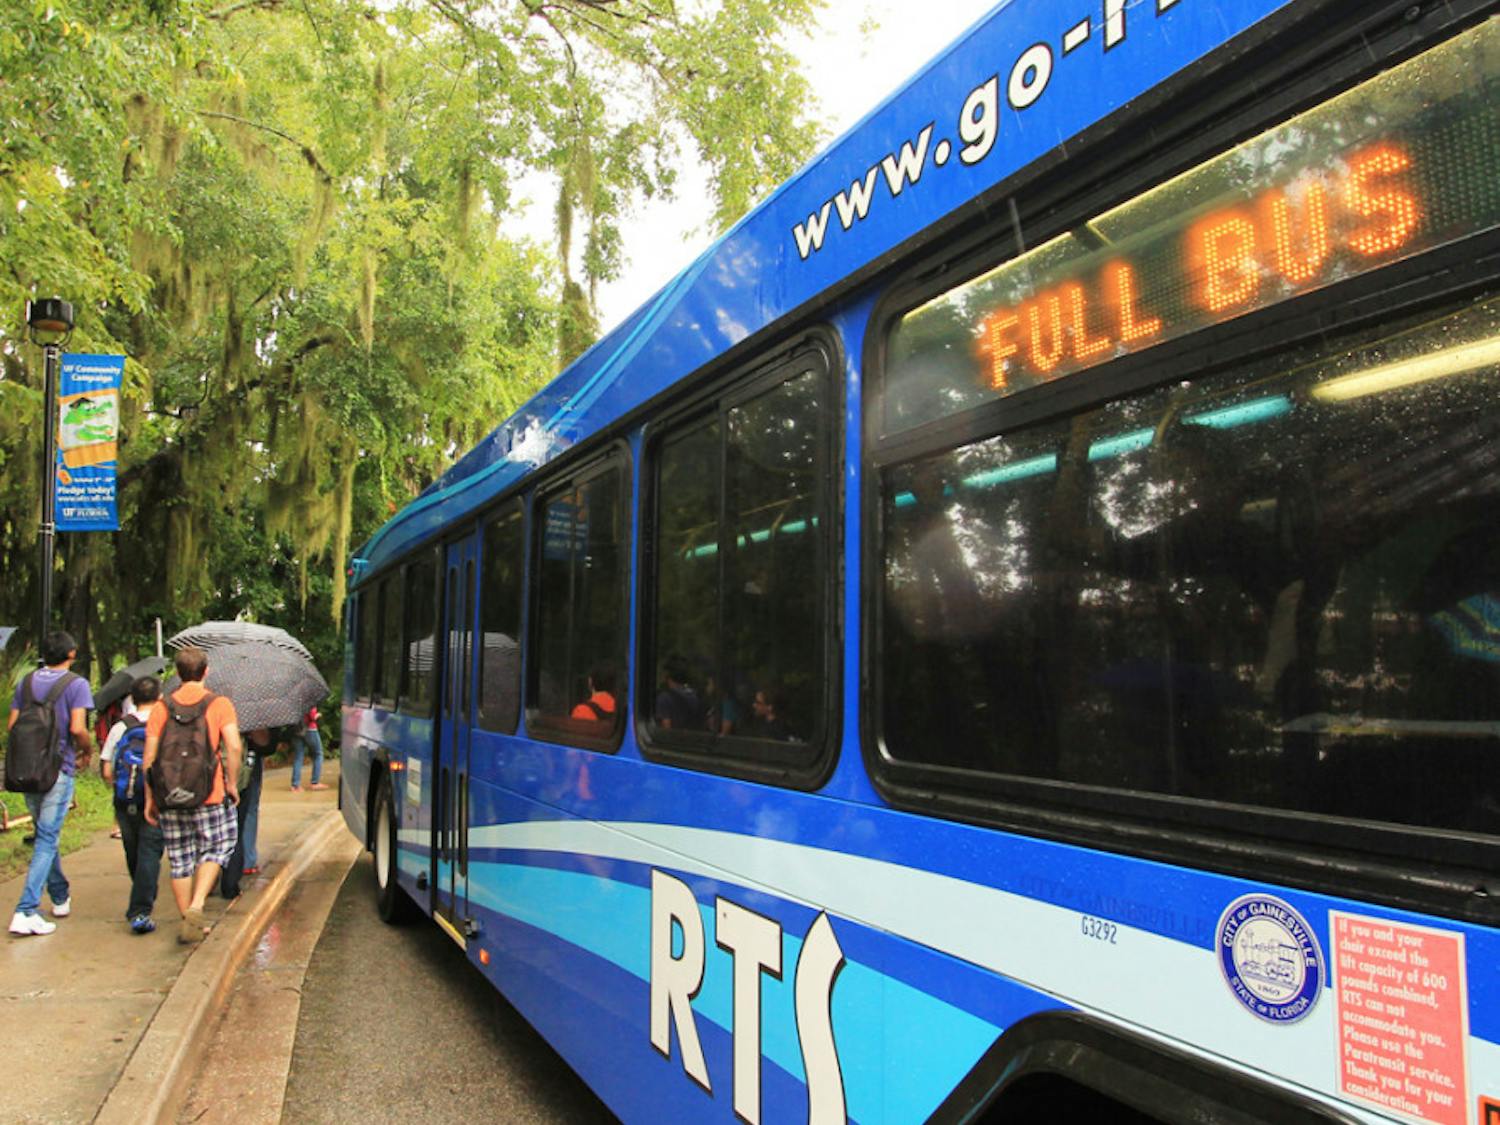 Full buses were common on campus this week. A record-breaking 64,835 passengers rode buses Wednesday.